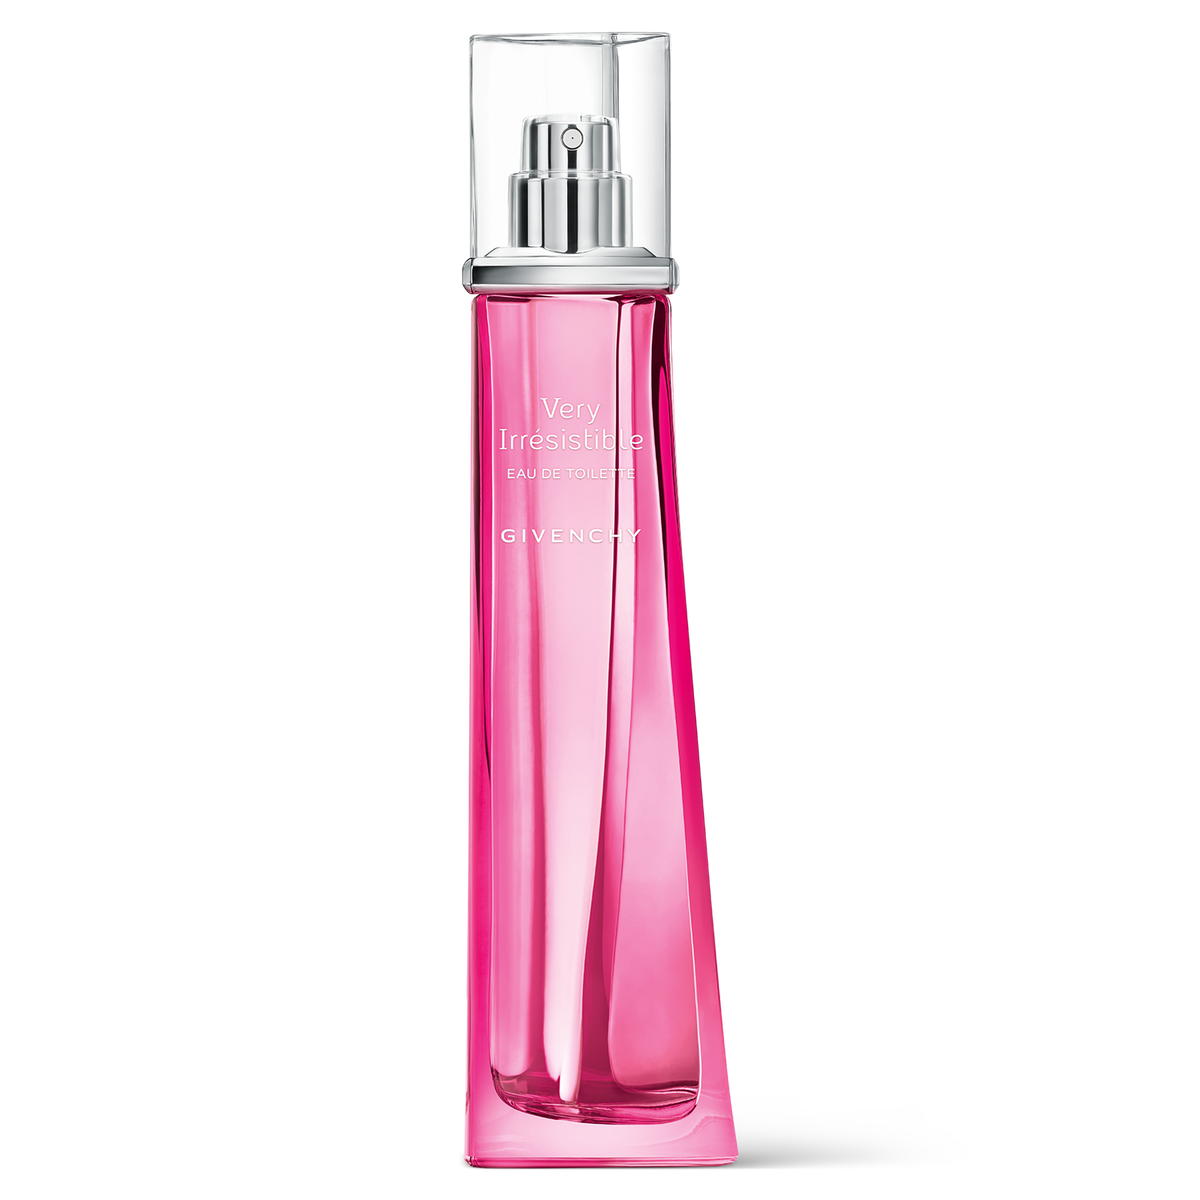 Very Irresistible By Givenchy For Women. Eau De Toilette Spray 2.5 Ounces 2.5 Fl Oz (Pack of 1)